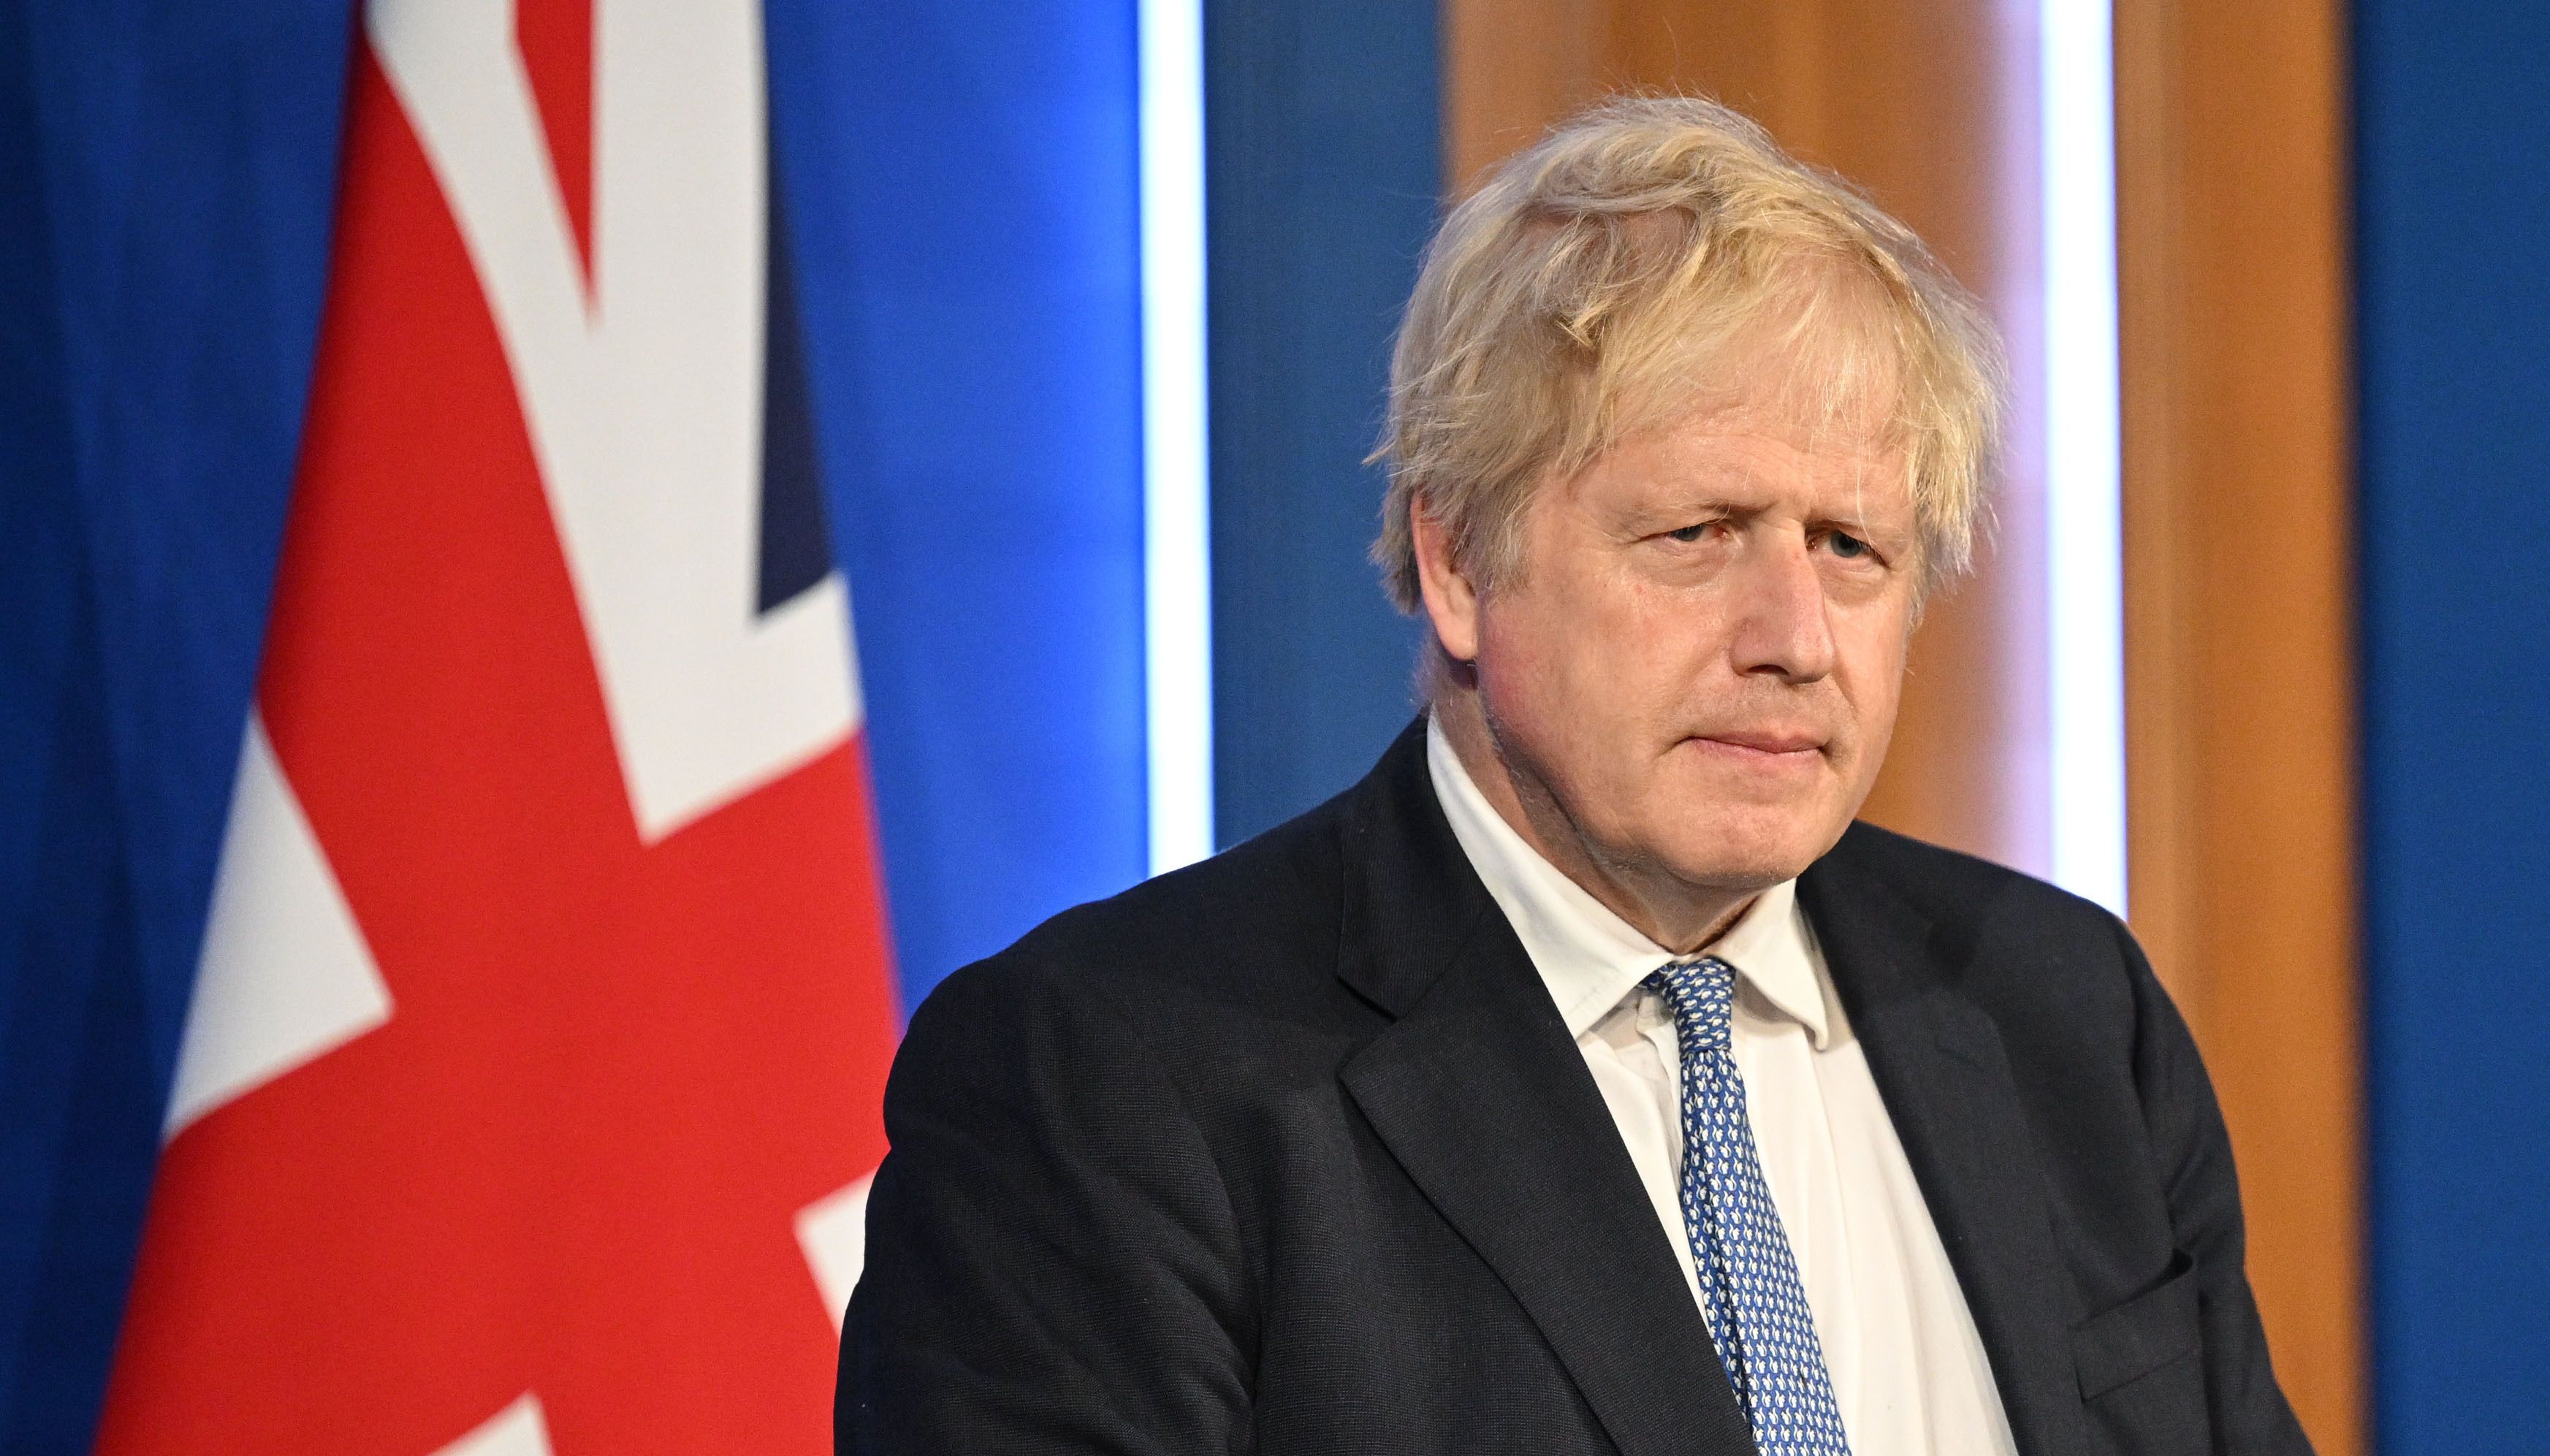 Prime Minister Boris Johnson speaks during a press conference in Downing Street, London, following the publication of Sue Gray's report into Downing Street parties.